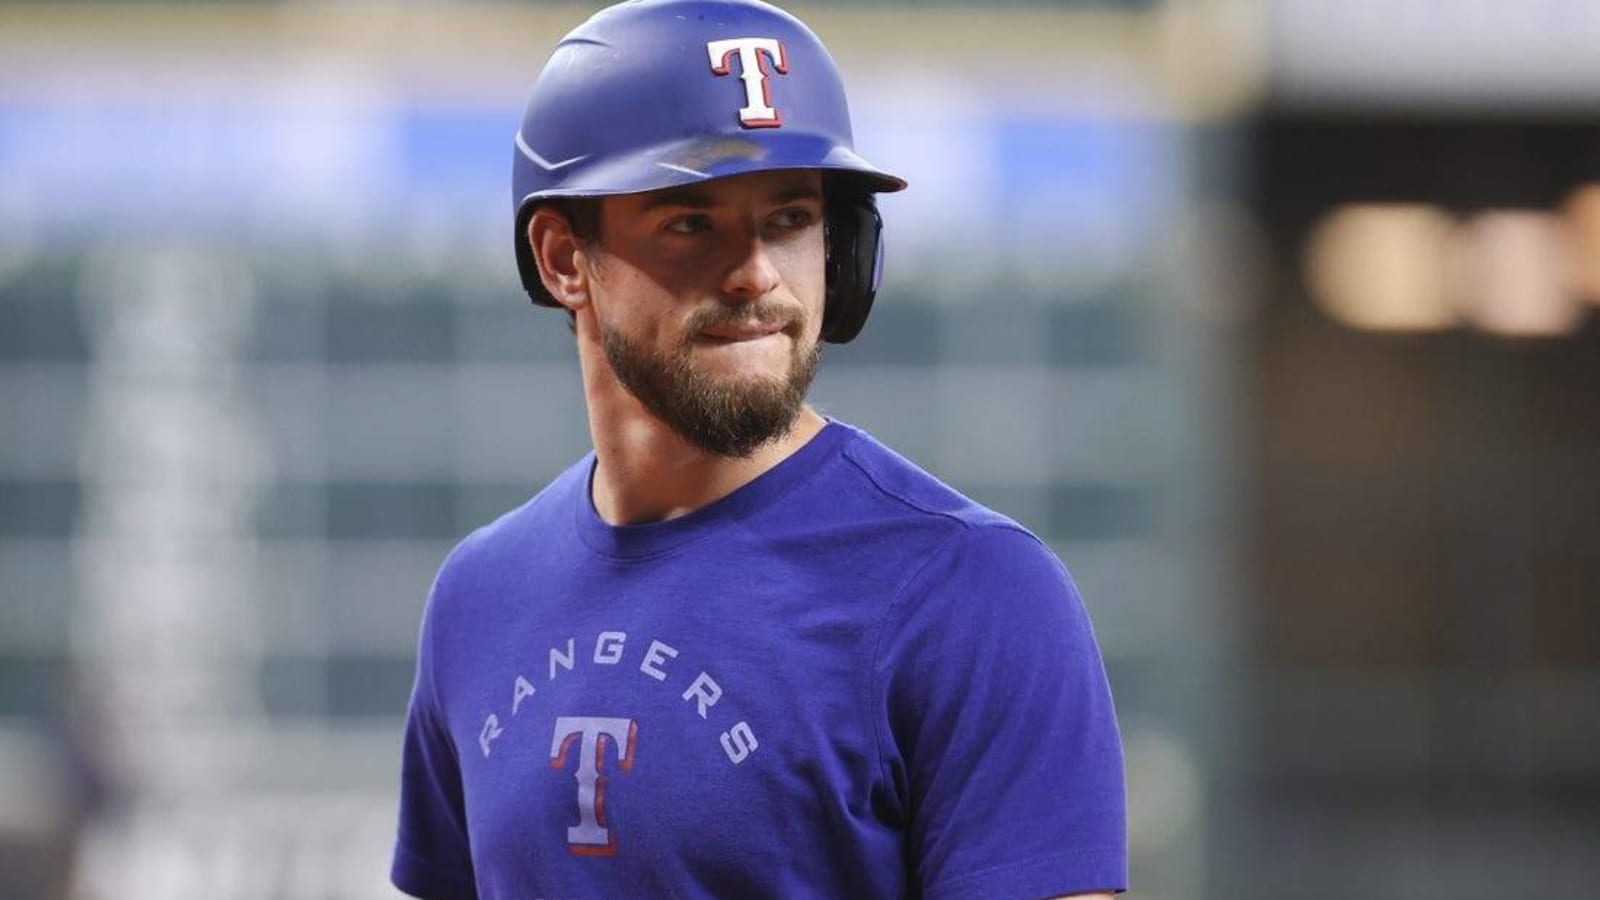 Report: Rangers INF/OF Nick Solak (foot) out for season